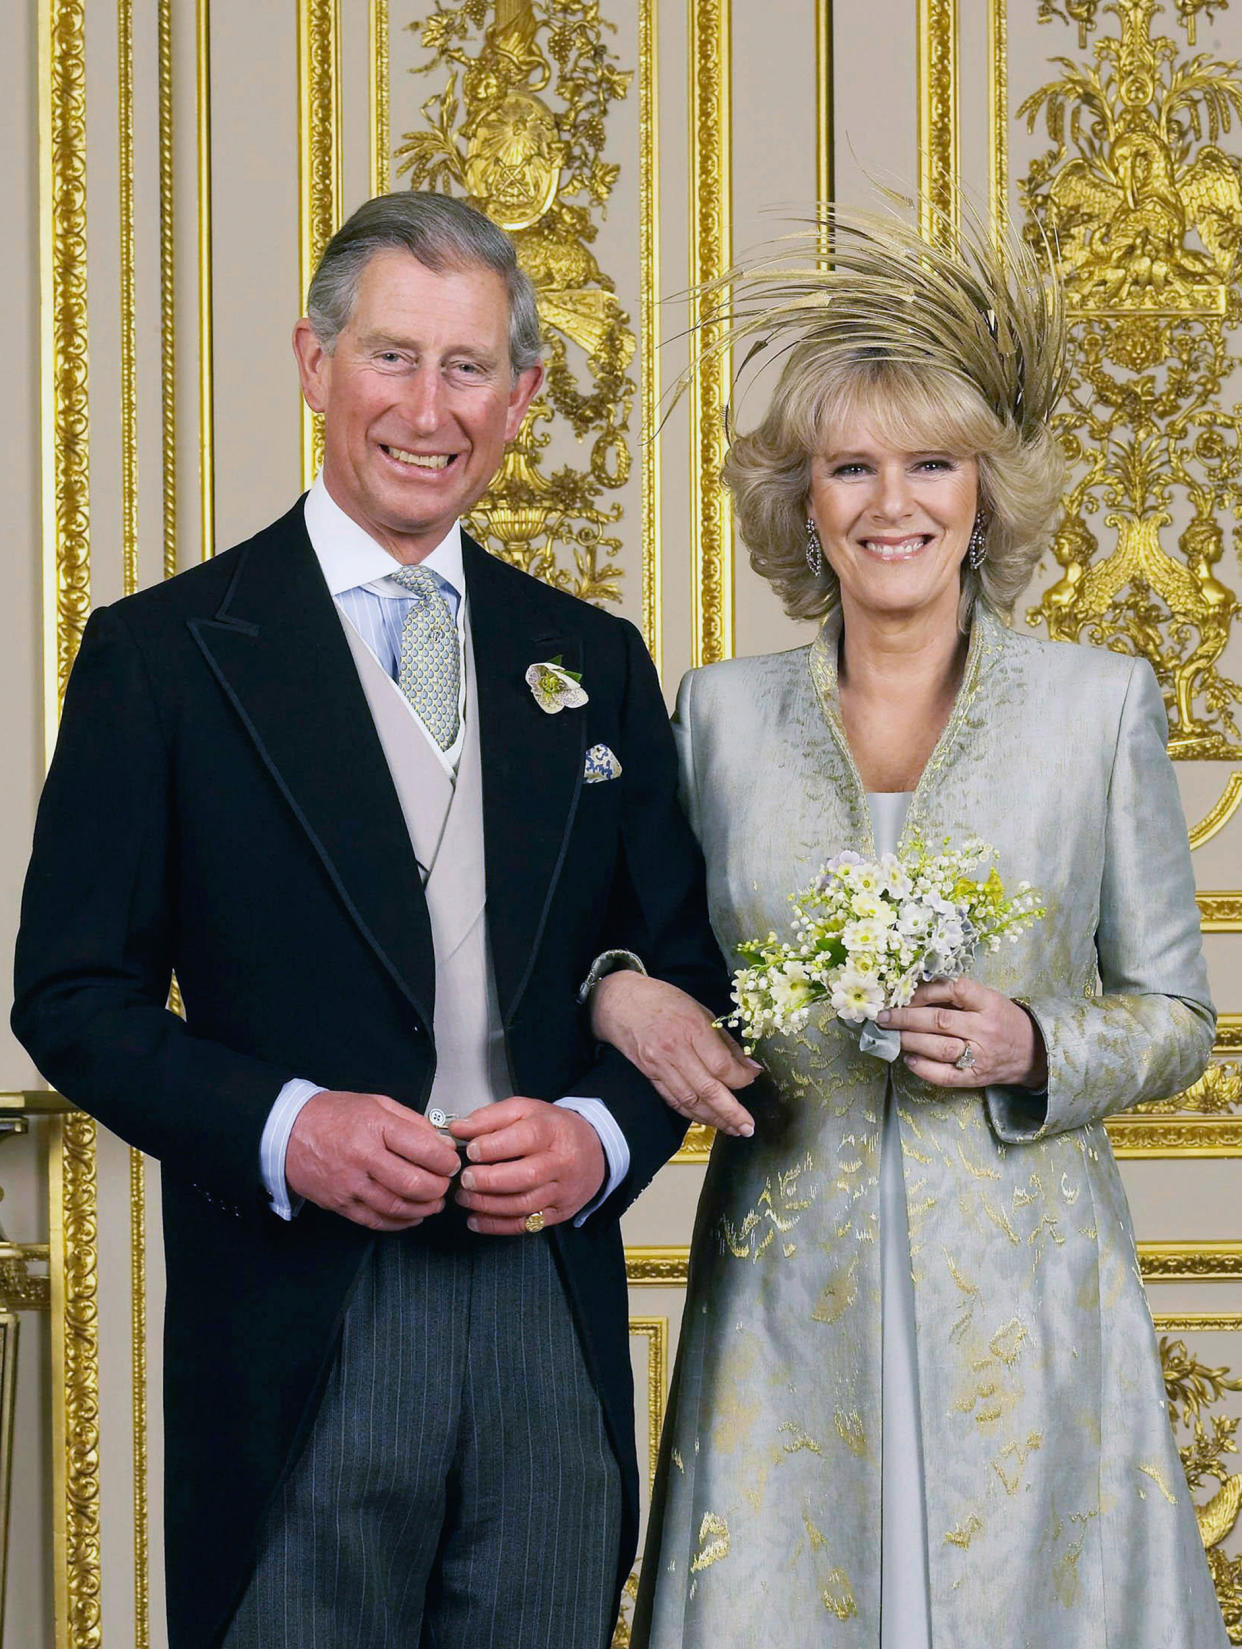 TRH Prince of Wales & The Duchess Of Cornwall - Official Wedding Photo (Hugo Burnand / Getty Images)